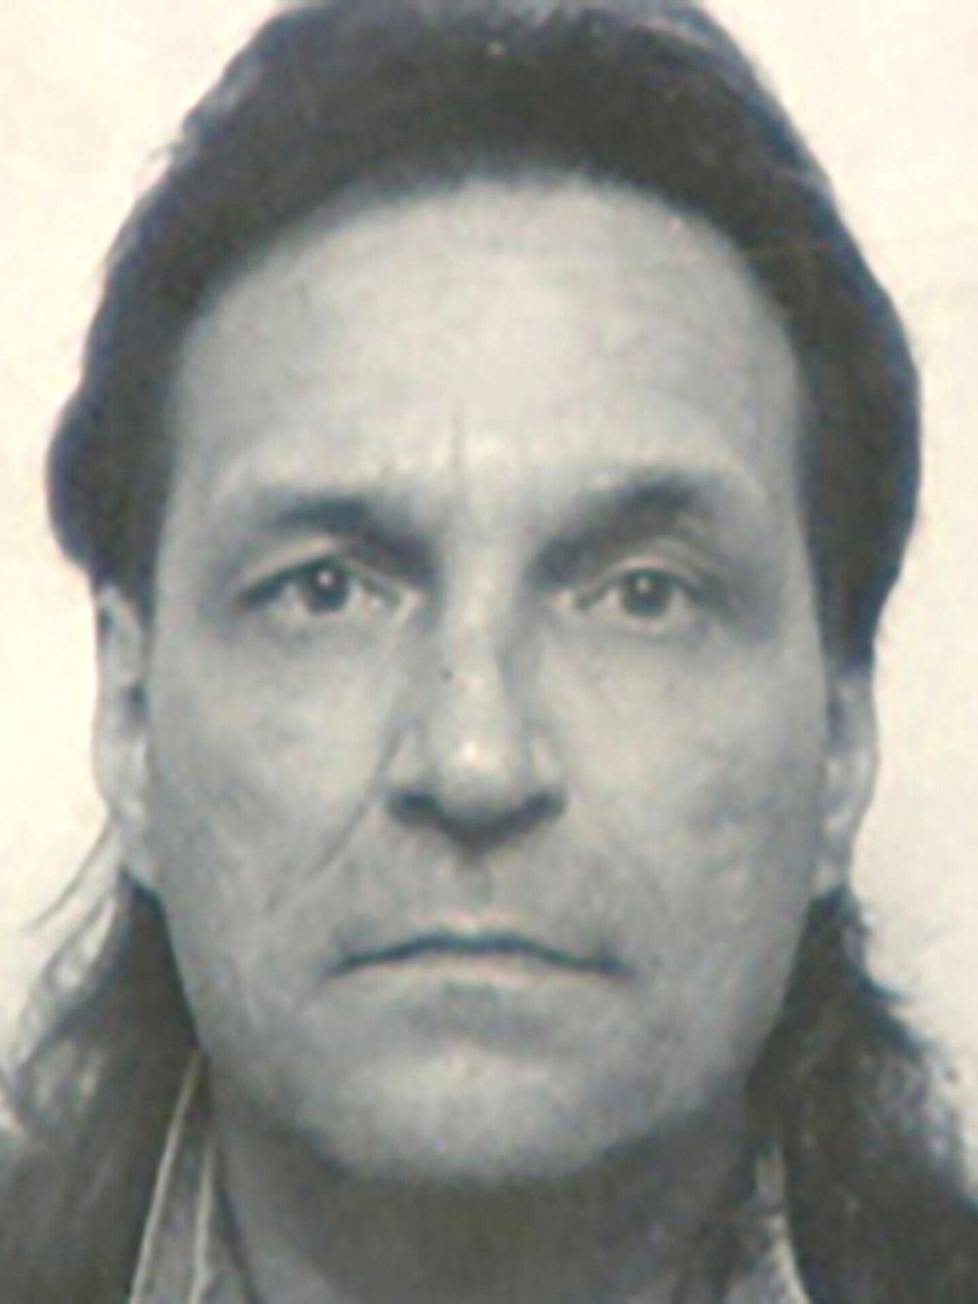 Photo of Kai Salomaa published by the police.